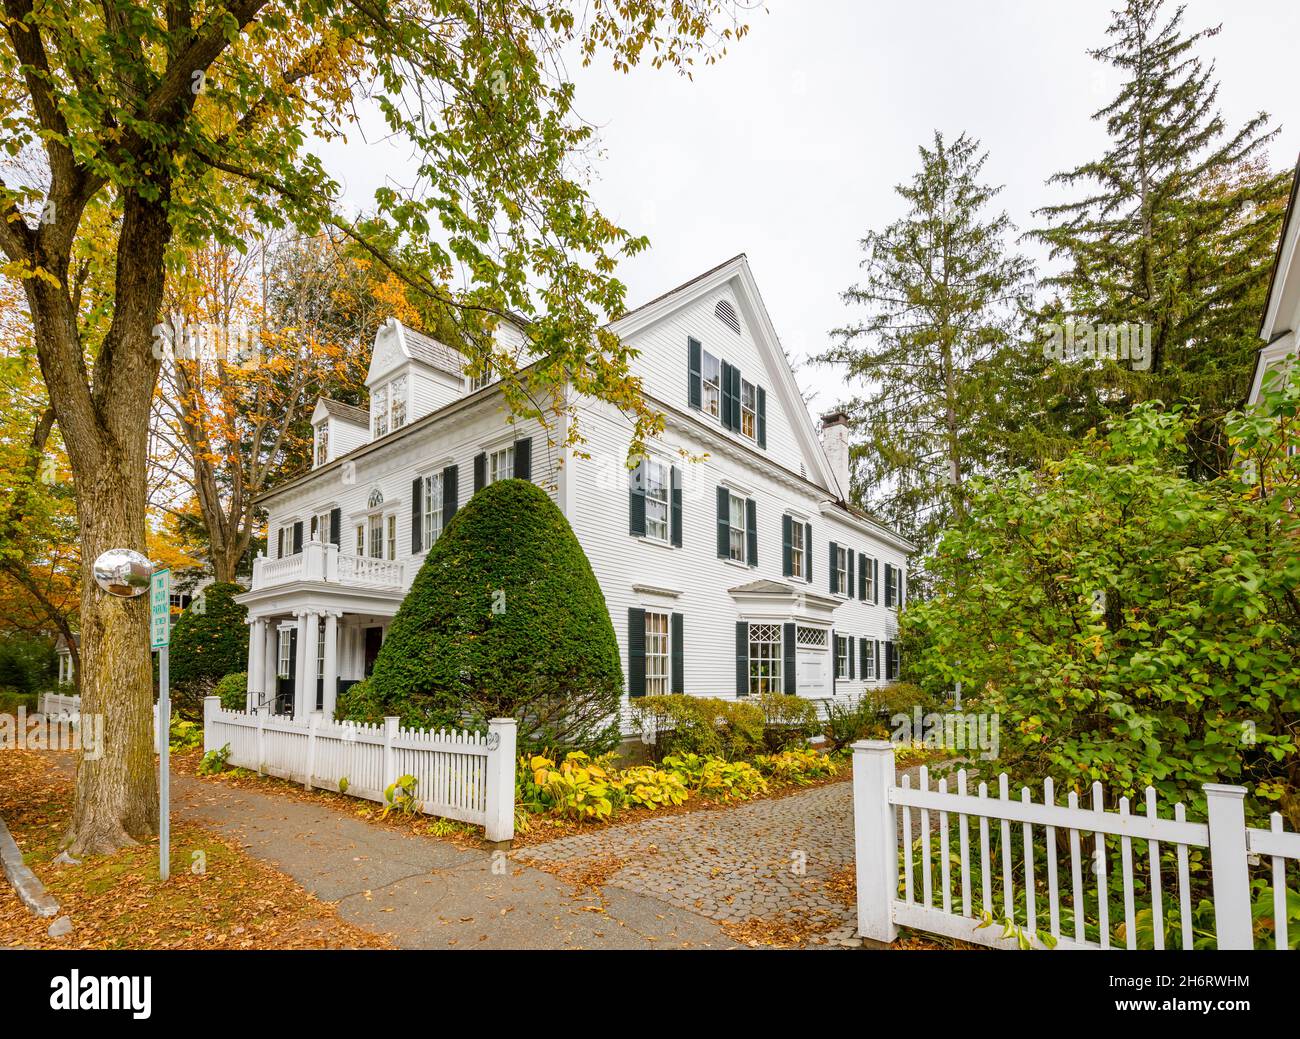 Typical local style large white clapboard faced house in Woodstock, Vermont, New England, USA Stock Photo